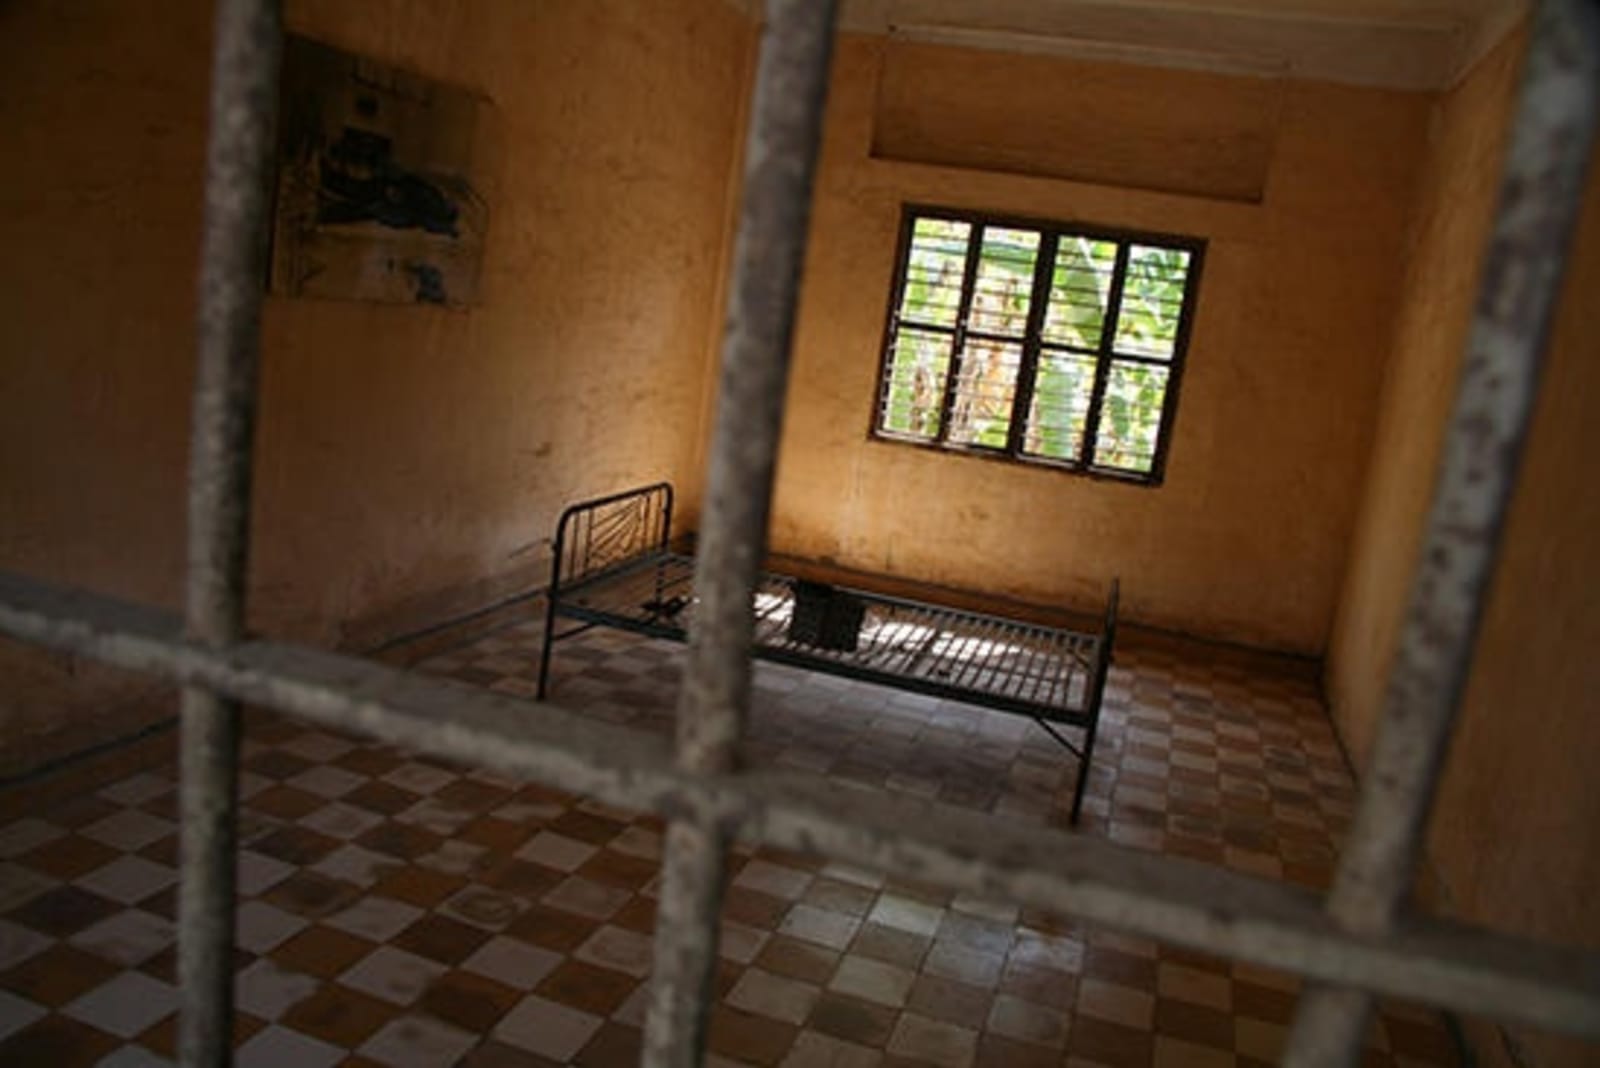 Cell in Tuol Sleng Museum.